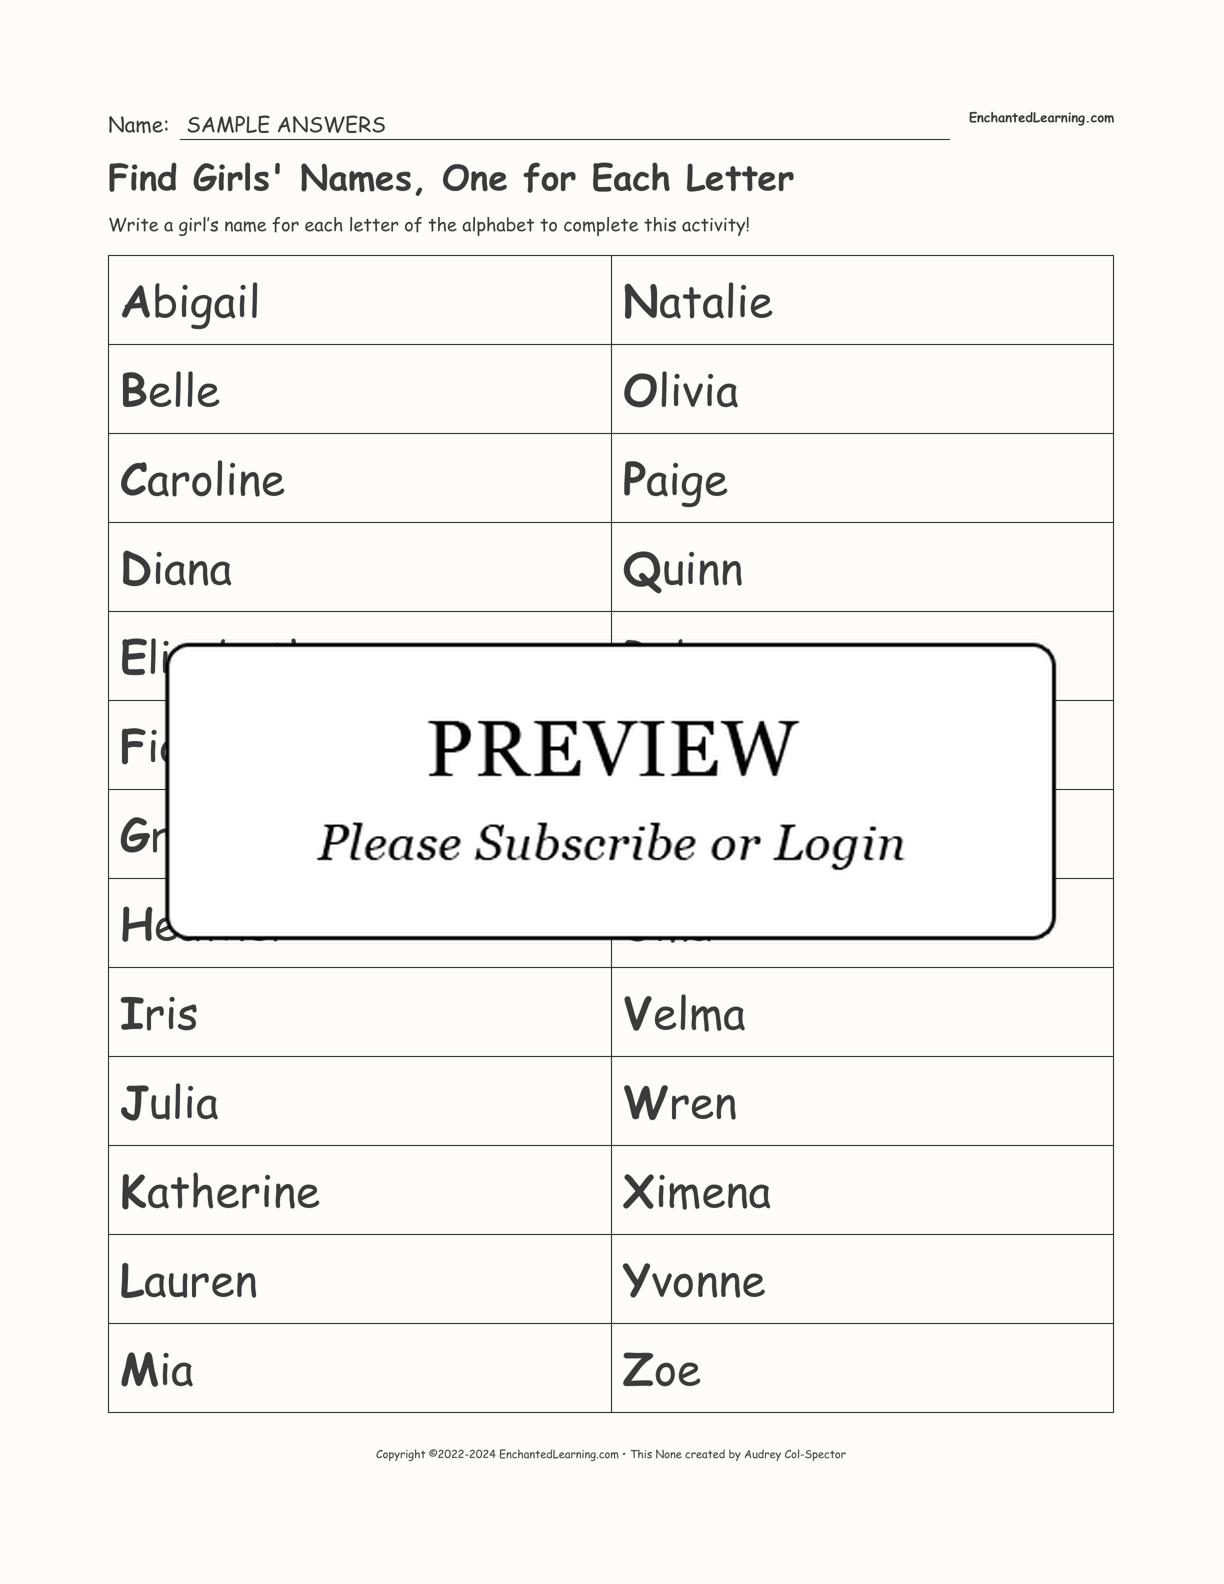 Find Girls' Names, One for Each Letter interactive worksheet page 2